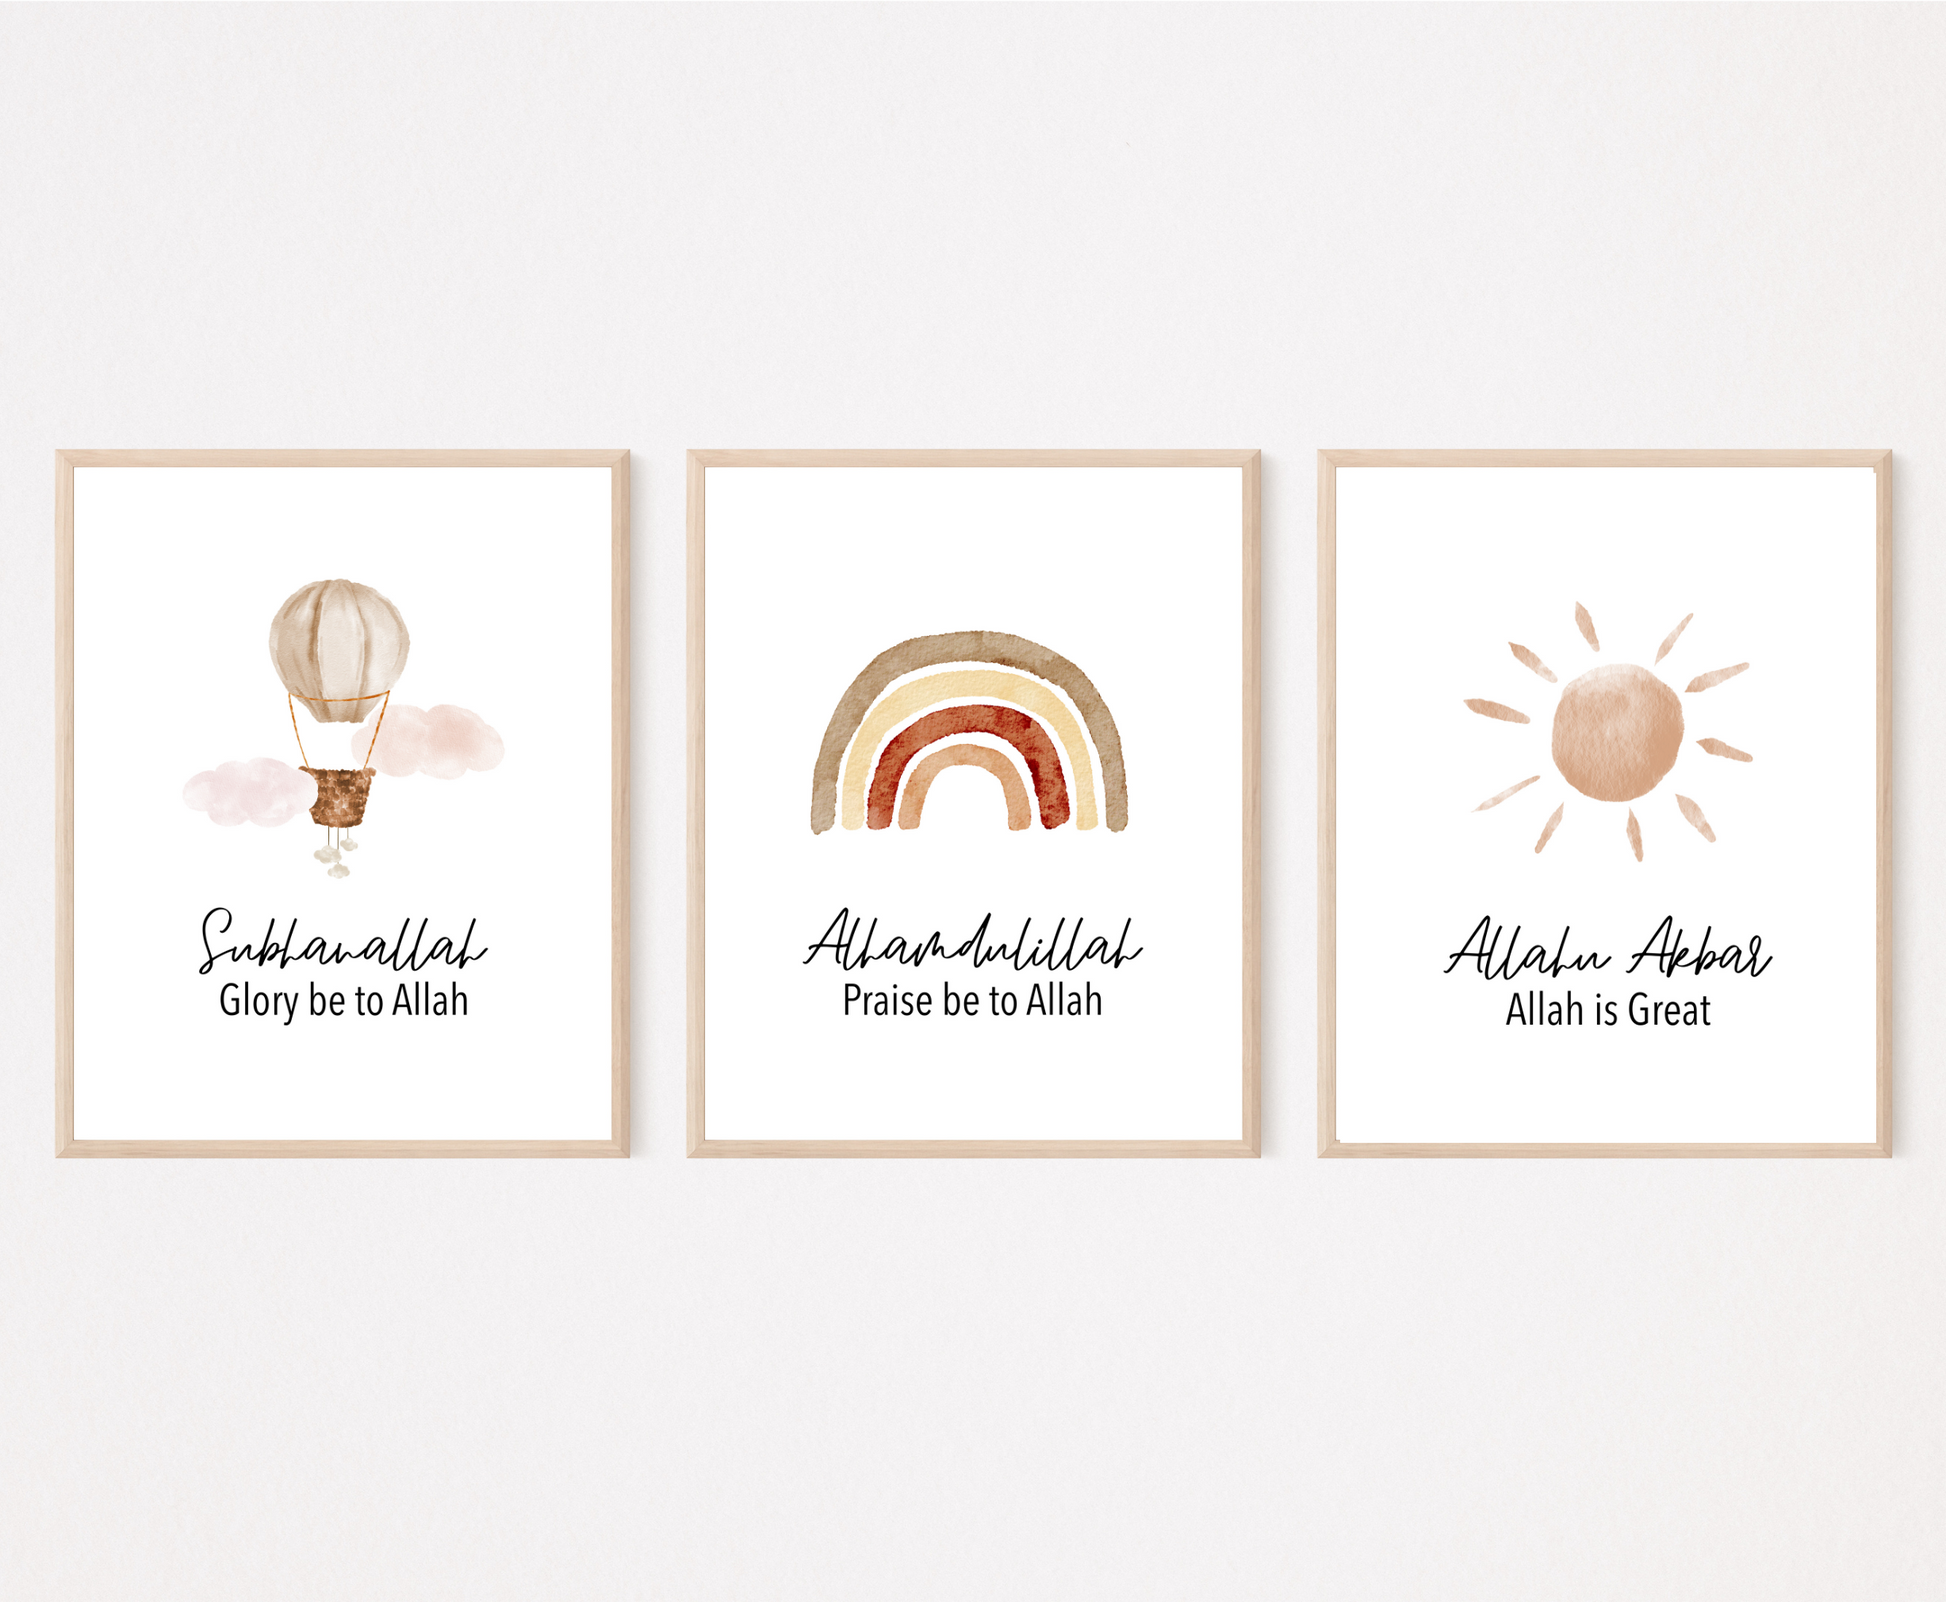 Three frames with three different graphics. The first one shows a light brown air balloon with the word “Subhanallah”, Glory Be to Allah, written below. The middle one shows a different degree brown rainbow design with the word “Alhamdulillah”, Praise Be to Allah below. The last one shows a brown pinkish sun with the word “Allahu Akbar”, Allah is great, written below.